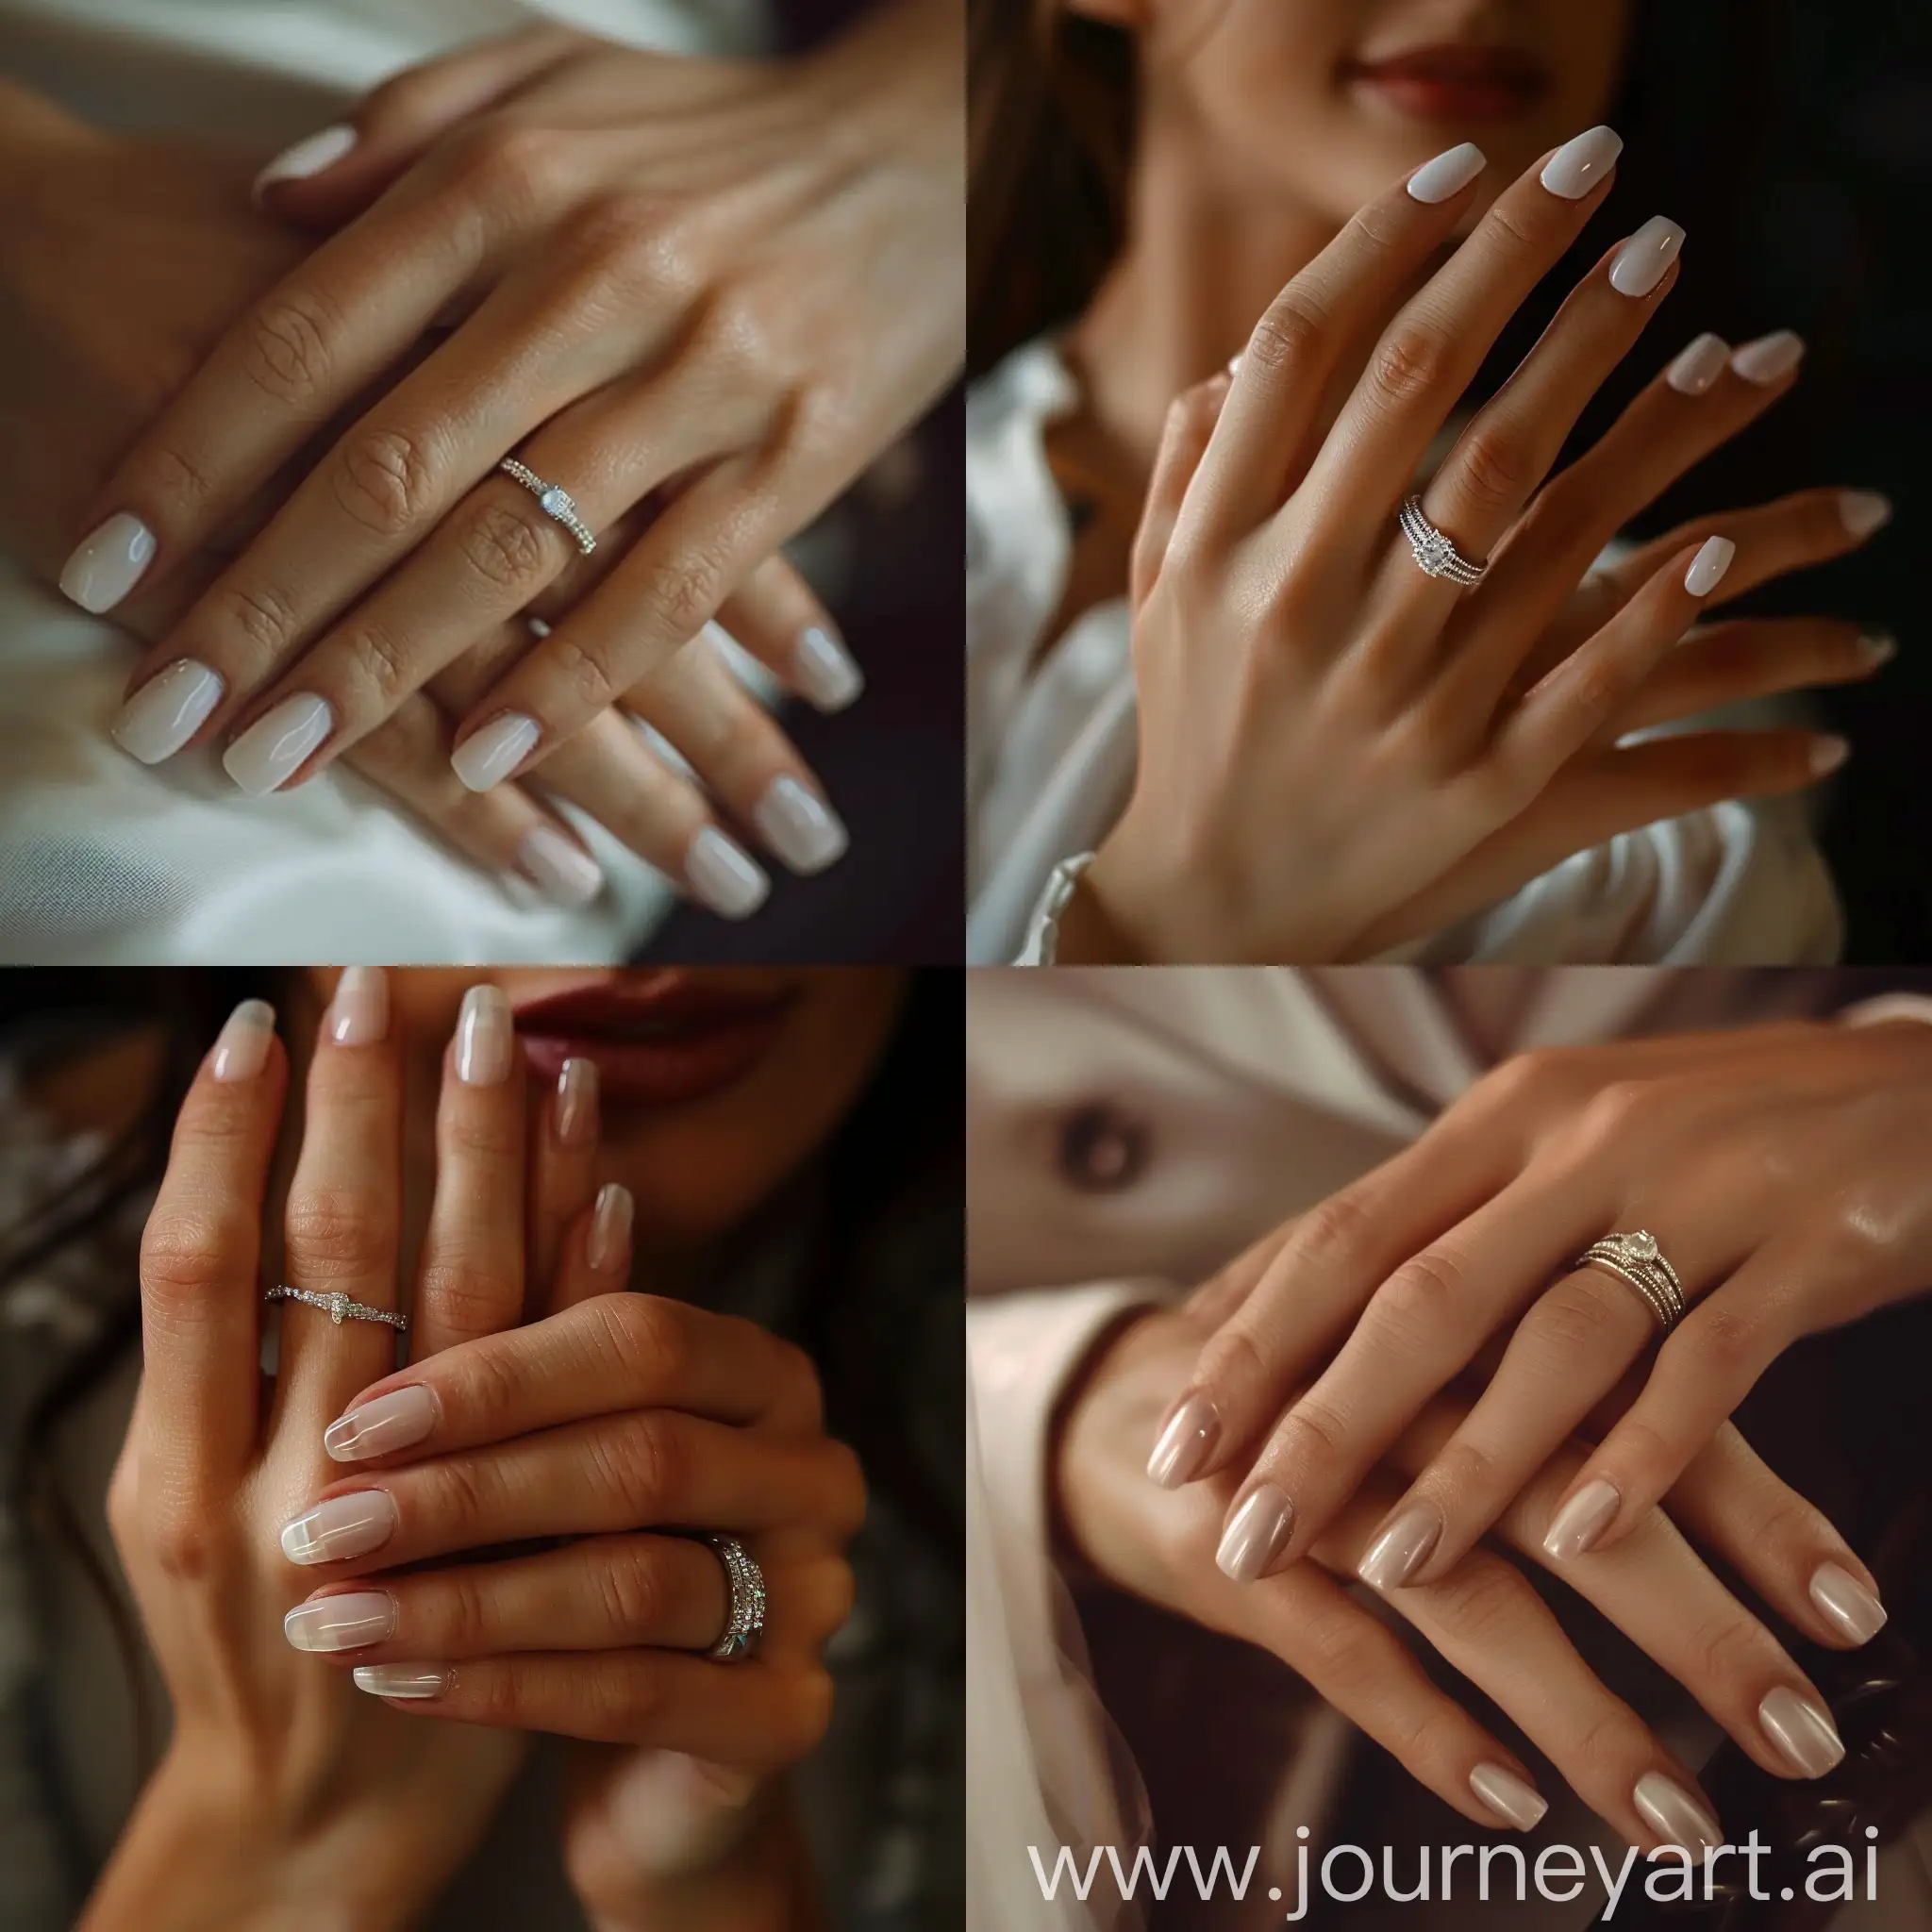 Instagram photo: A woman's hands resting atop her hands, wedding ring, close up shot, perfect nails